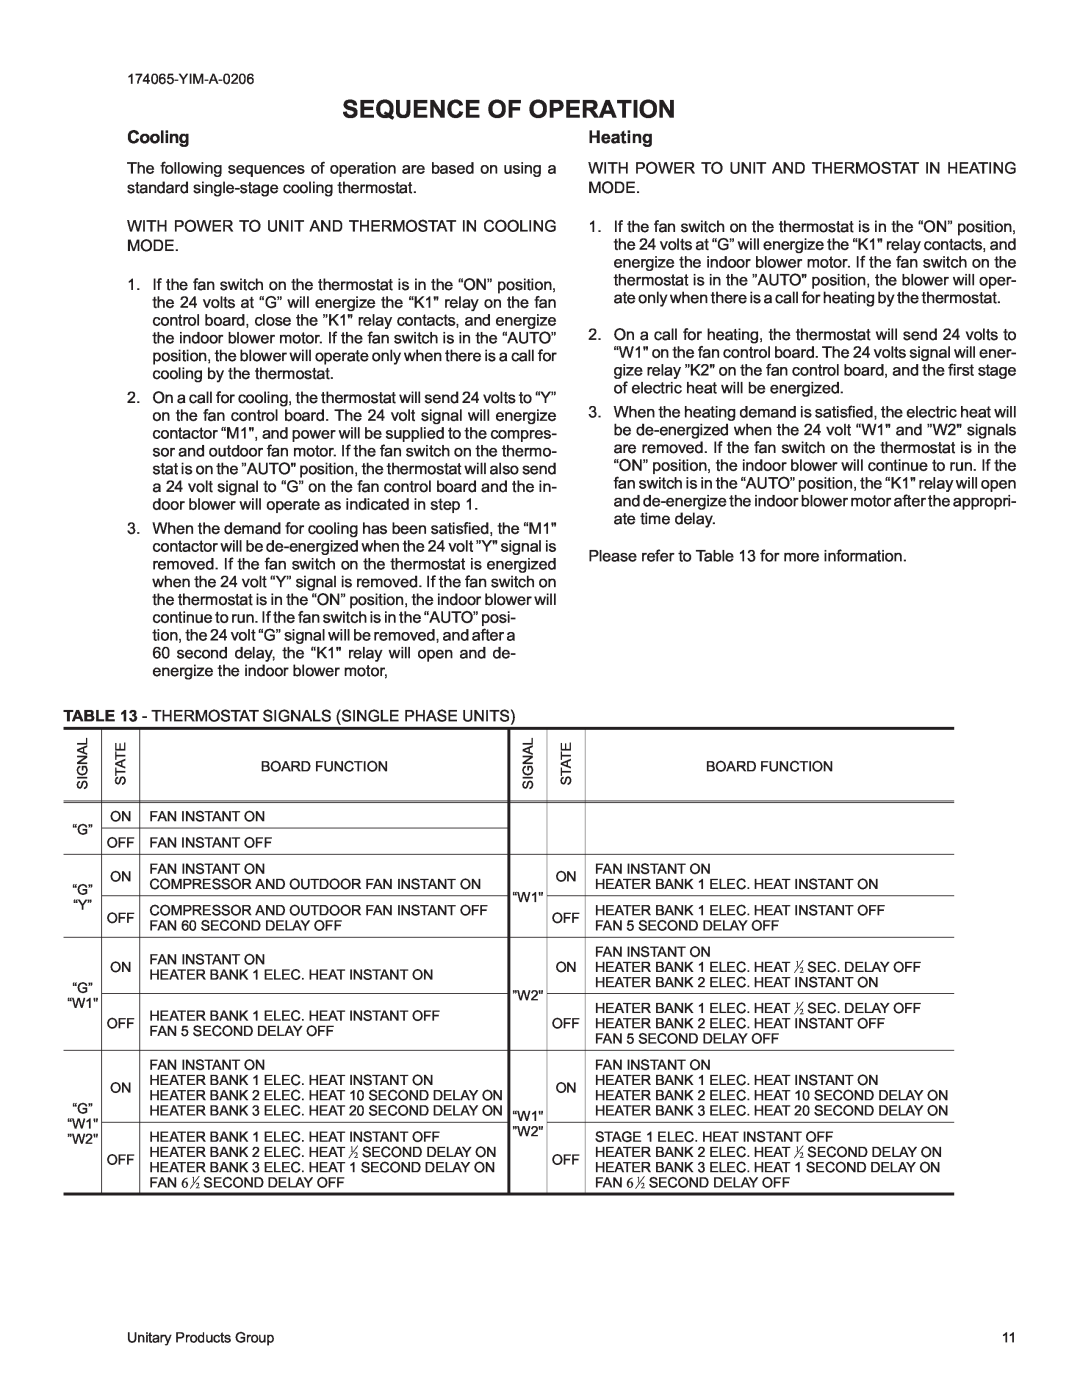 York D2EB installation instructions Sequence Of Operation, Cooling, Heating 